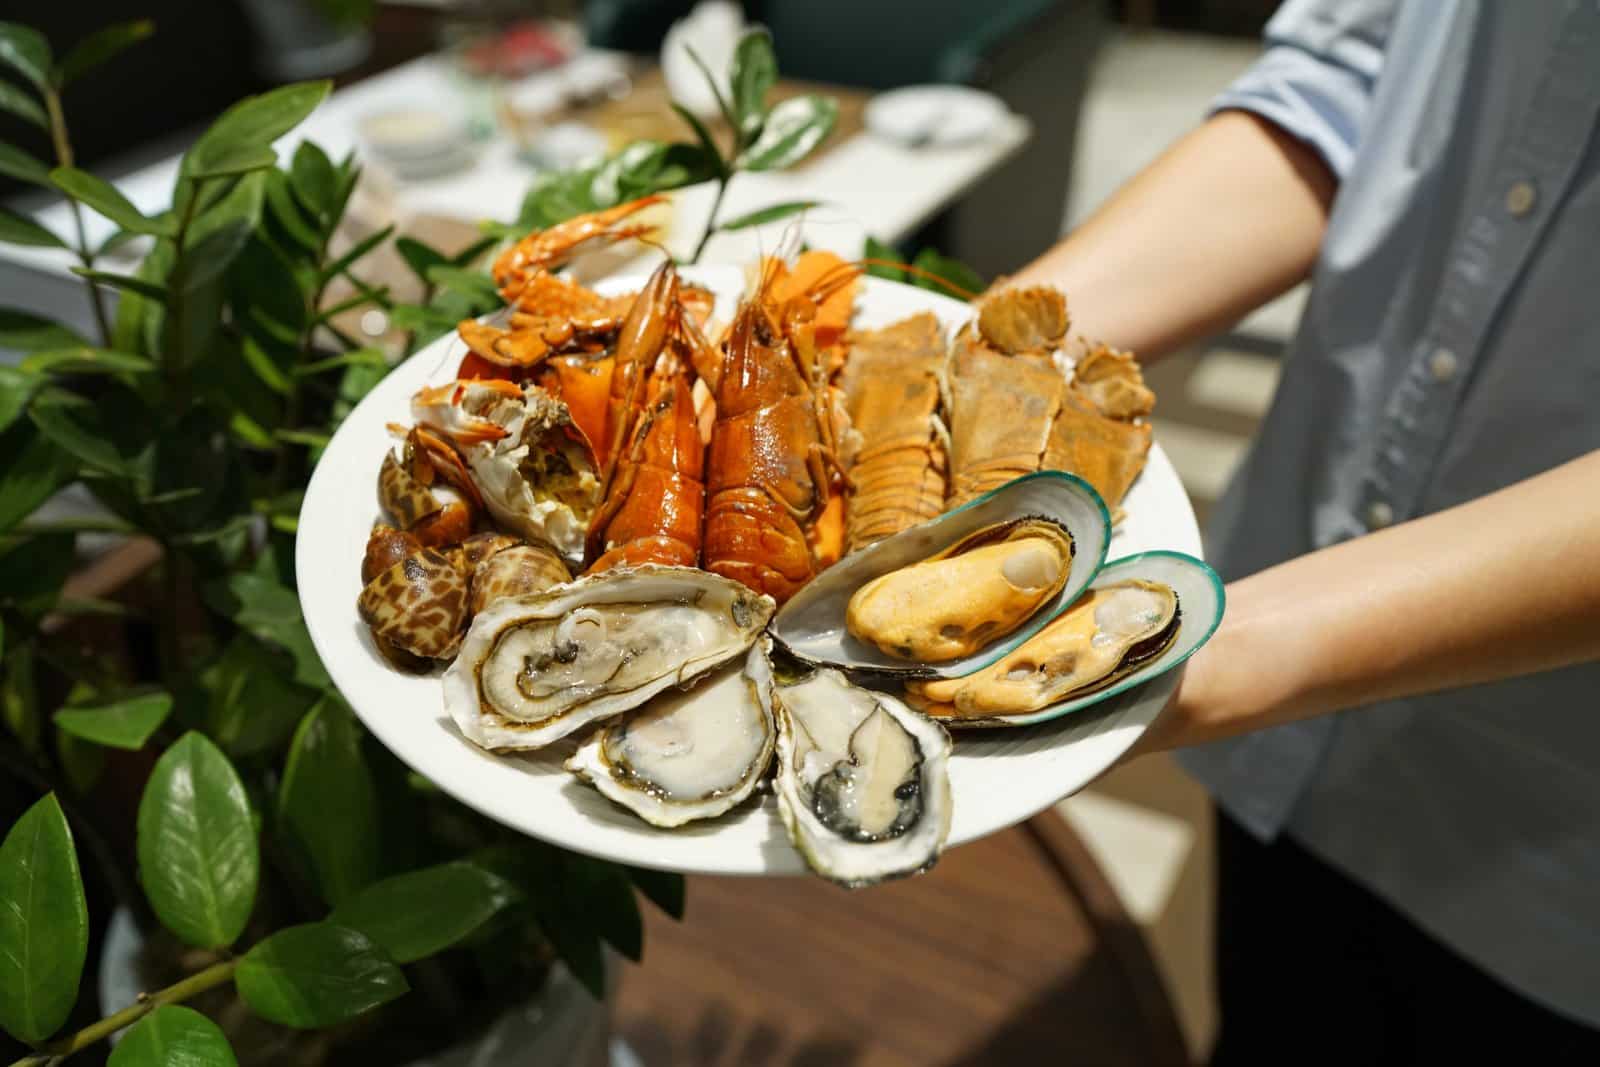 Image Credit: Shutterstock / thaweerat <p>Enjoy the freshest seafood along the stunning coastlines of Cape Town, including oysters, crayfish, and local fish.</p>